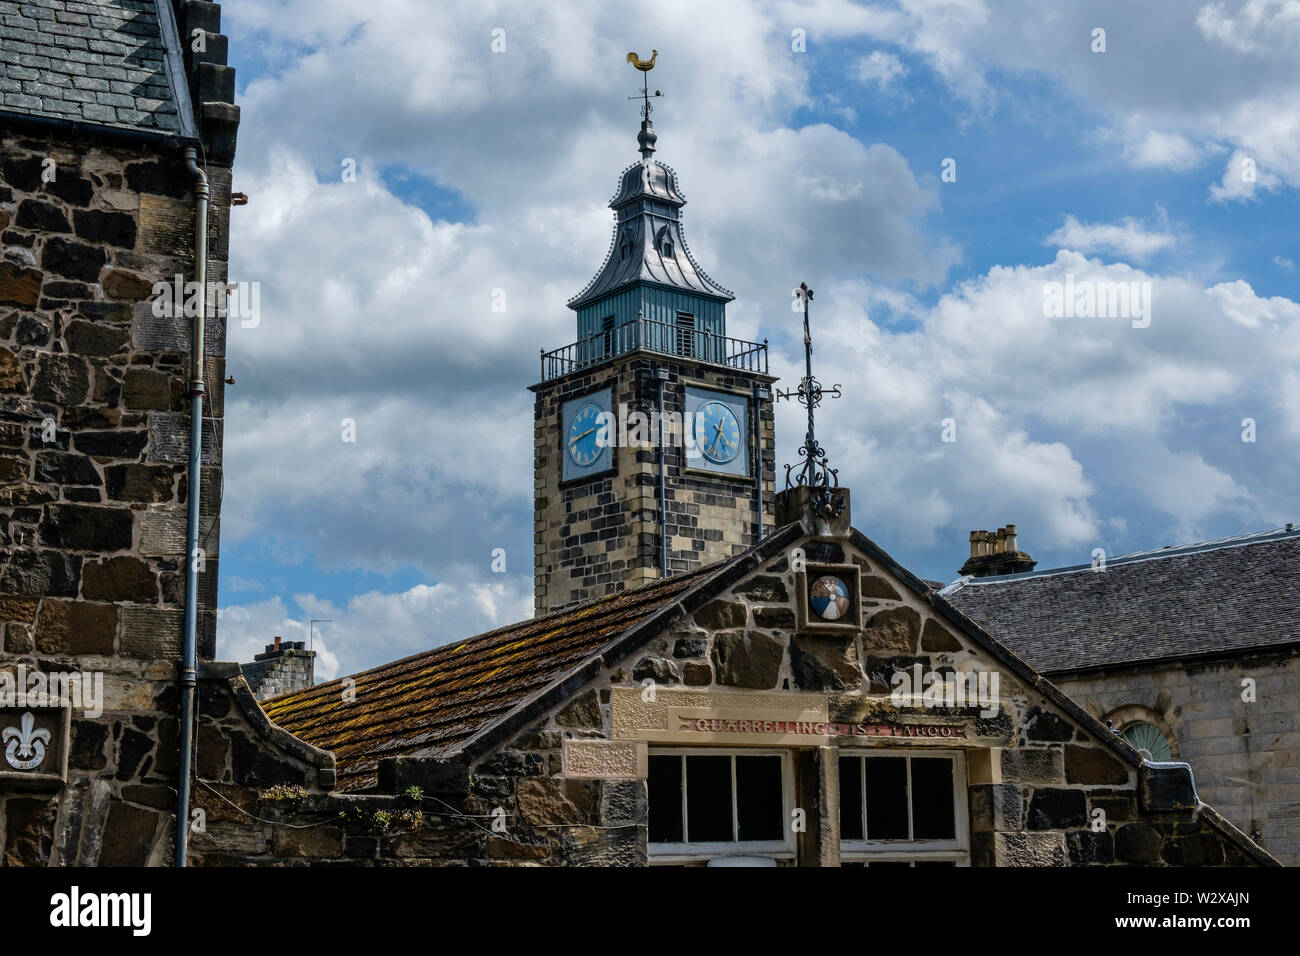 Scottish Boys Club Old Town Stirling Stirlingshire Scotland  with Tolbooth tower clock and stepped gable roofs Stock Photo